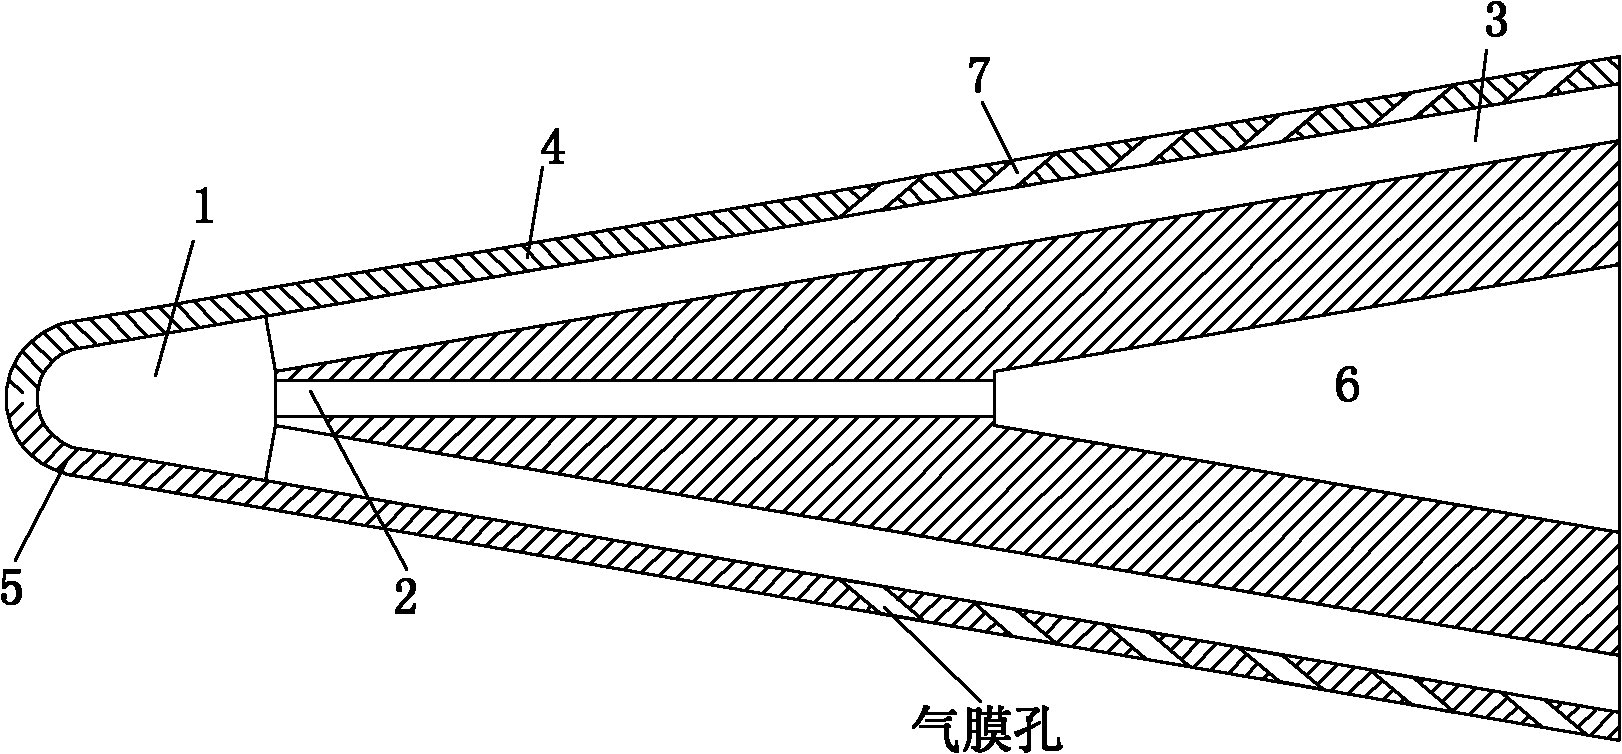 Front edge impact, micro through passage and air film cooling structure of hypersonic vehicle